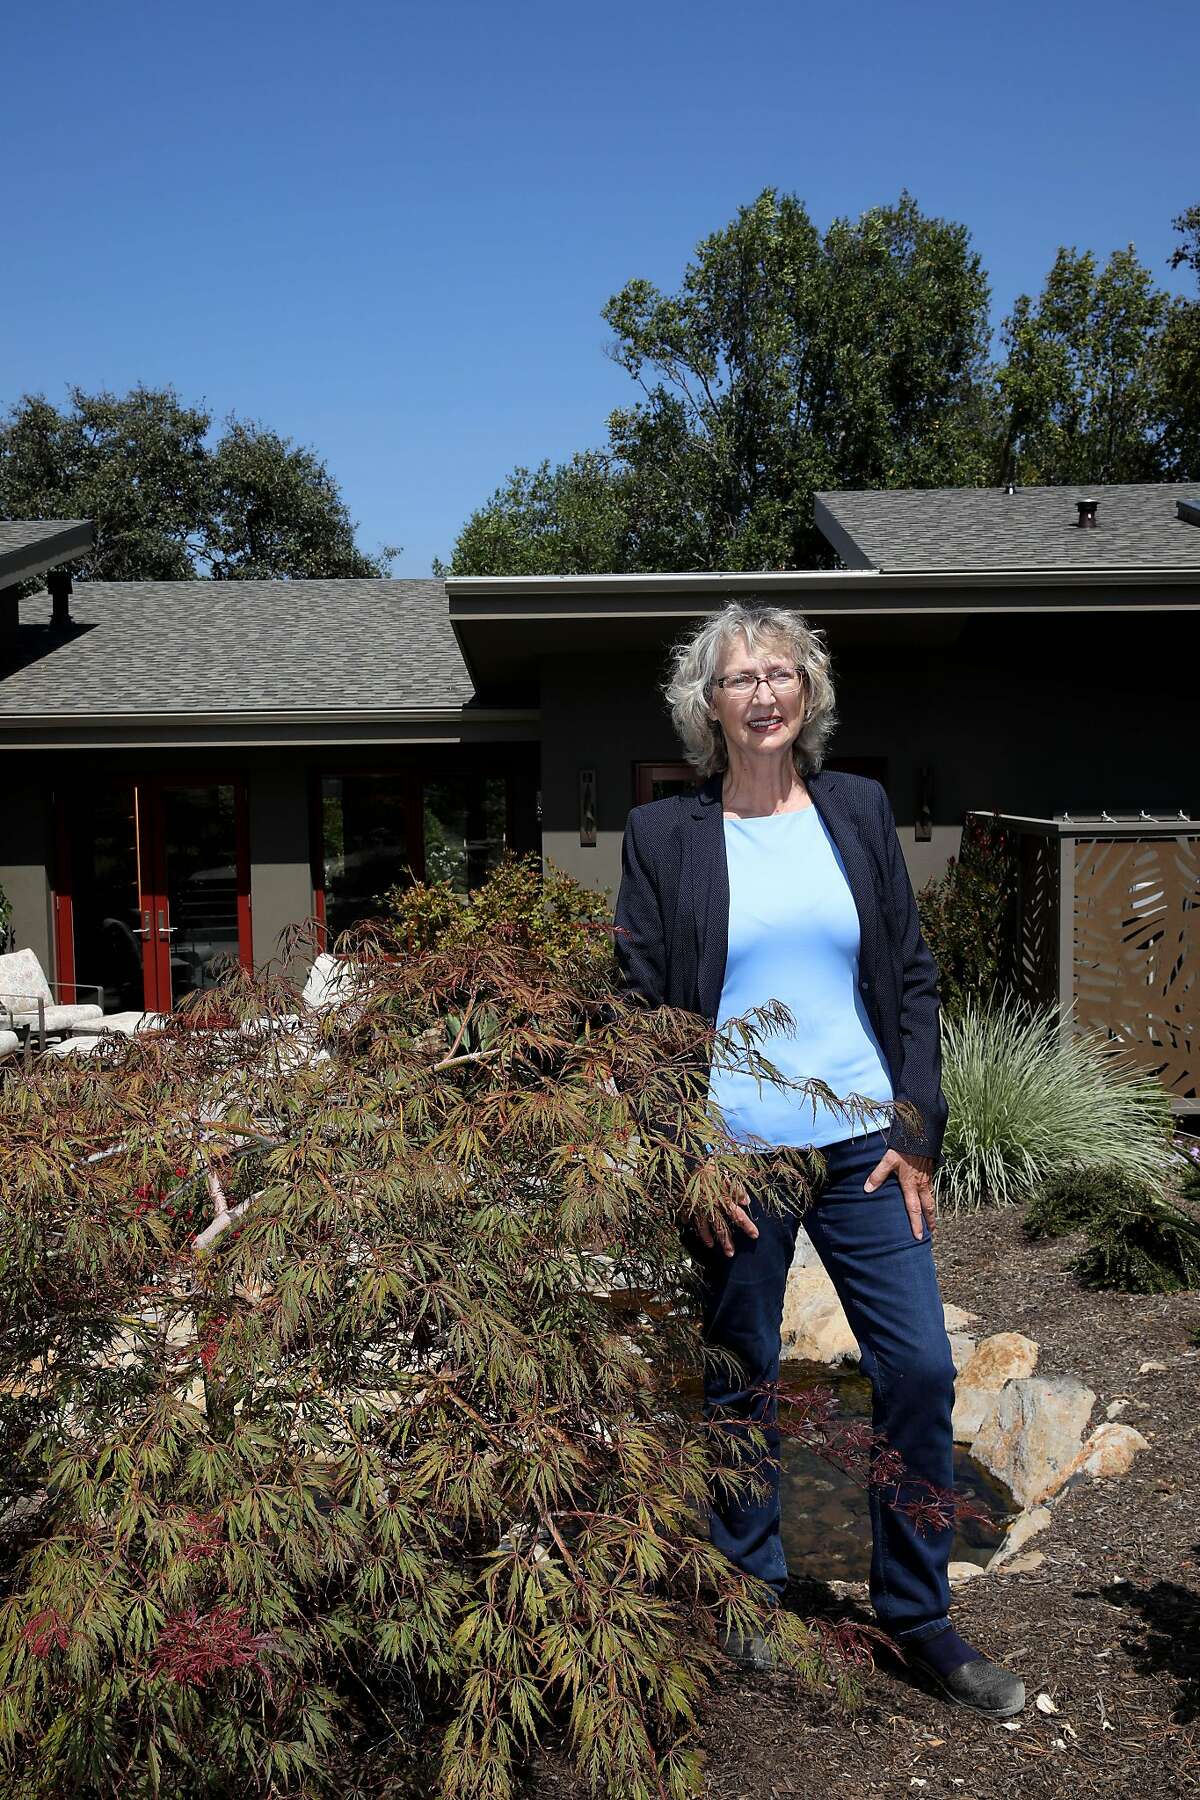 Architect Sara Harrison Woodfield poses for a portrait in the backyard belonging to Sandy and Dave Sandine on Thursday, August 27, 2020, in Santa Rosa, Calif.